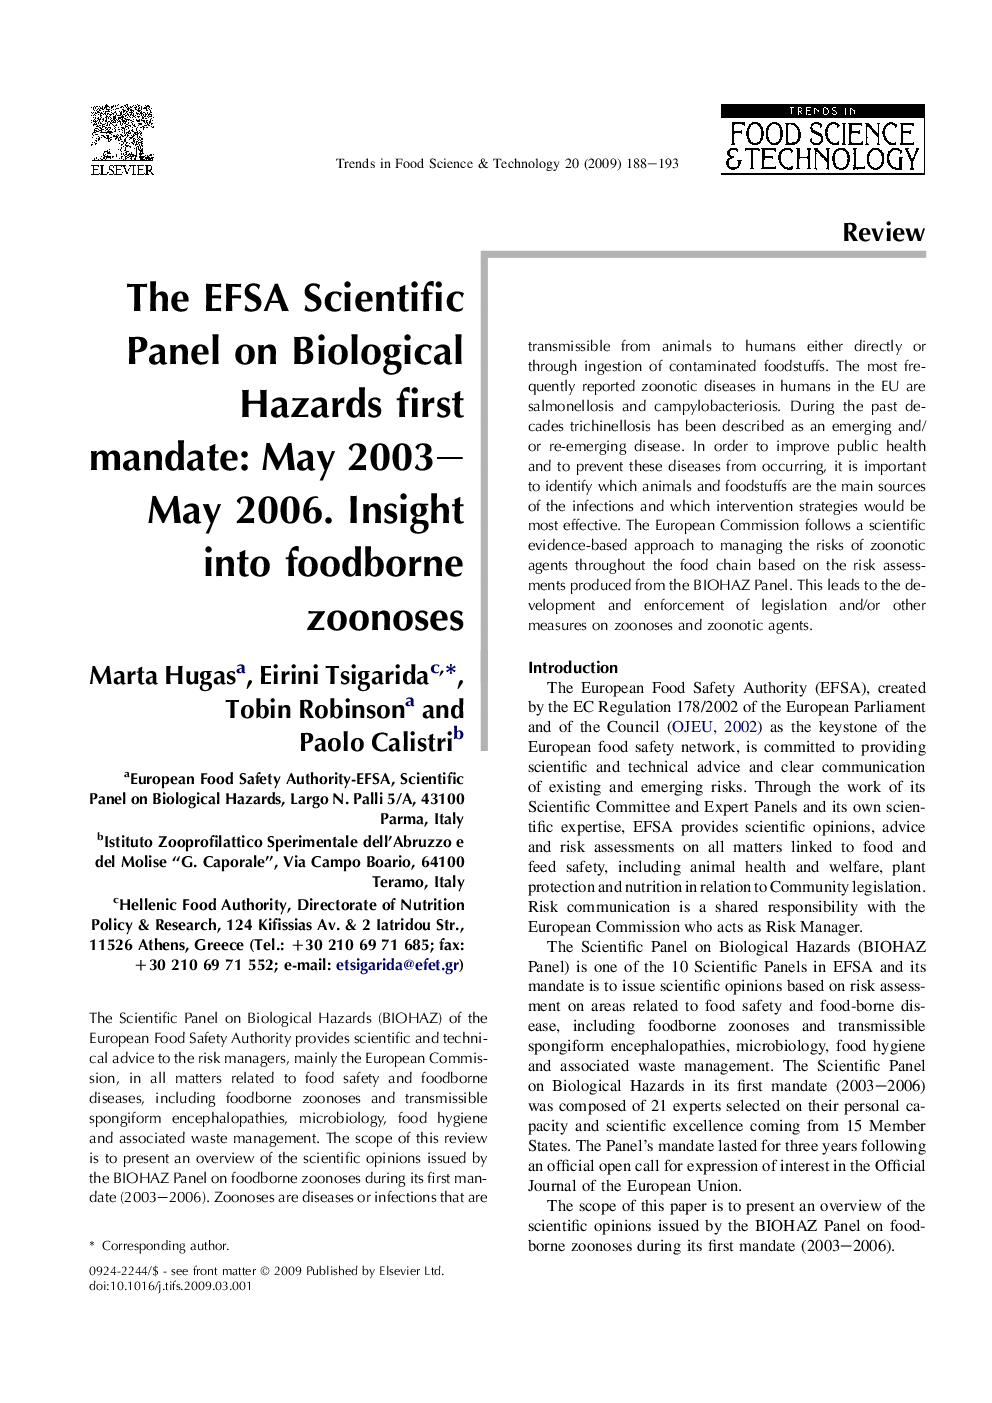 The EFSA Scientific Panel on Biological Hazards first mandate: May 2003–May 2006. Insight into foodborne zoonoses